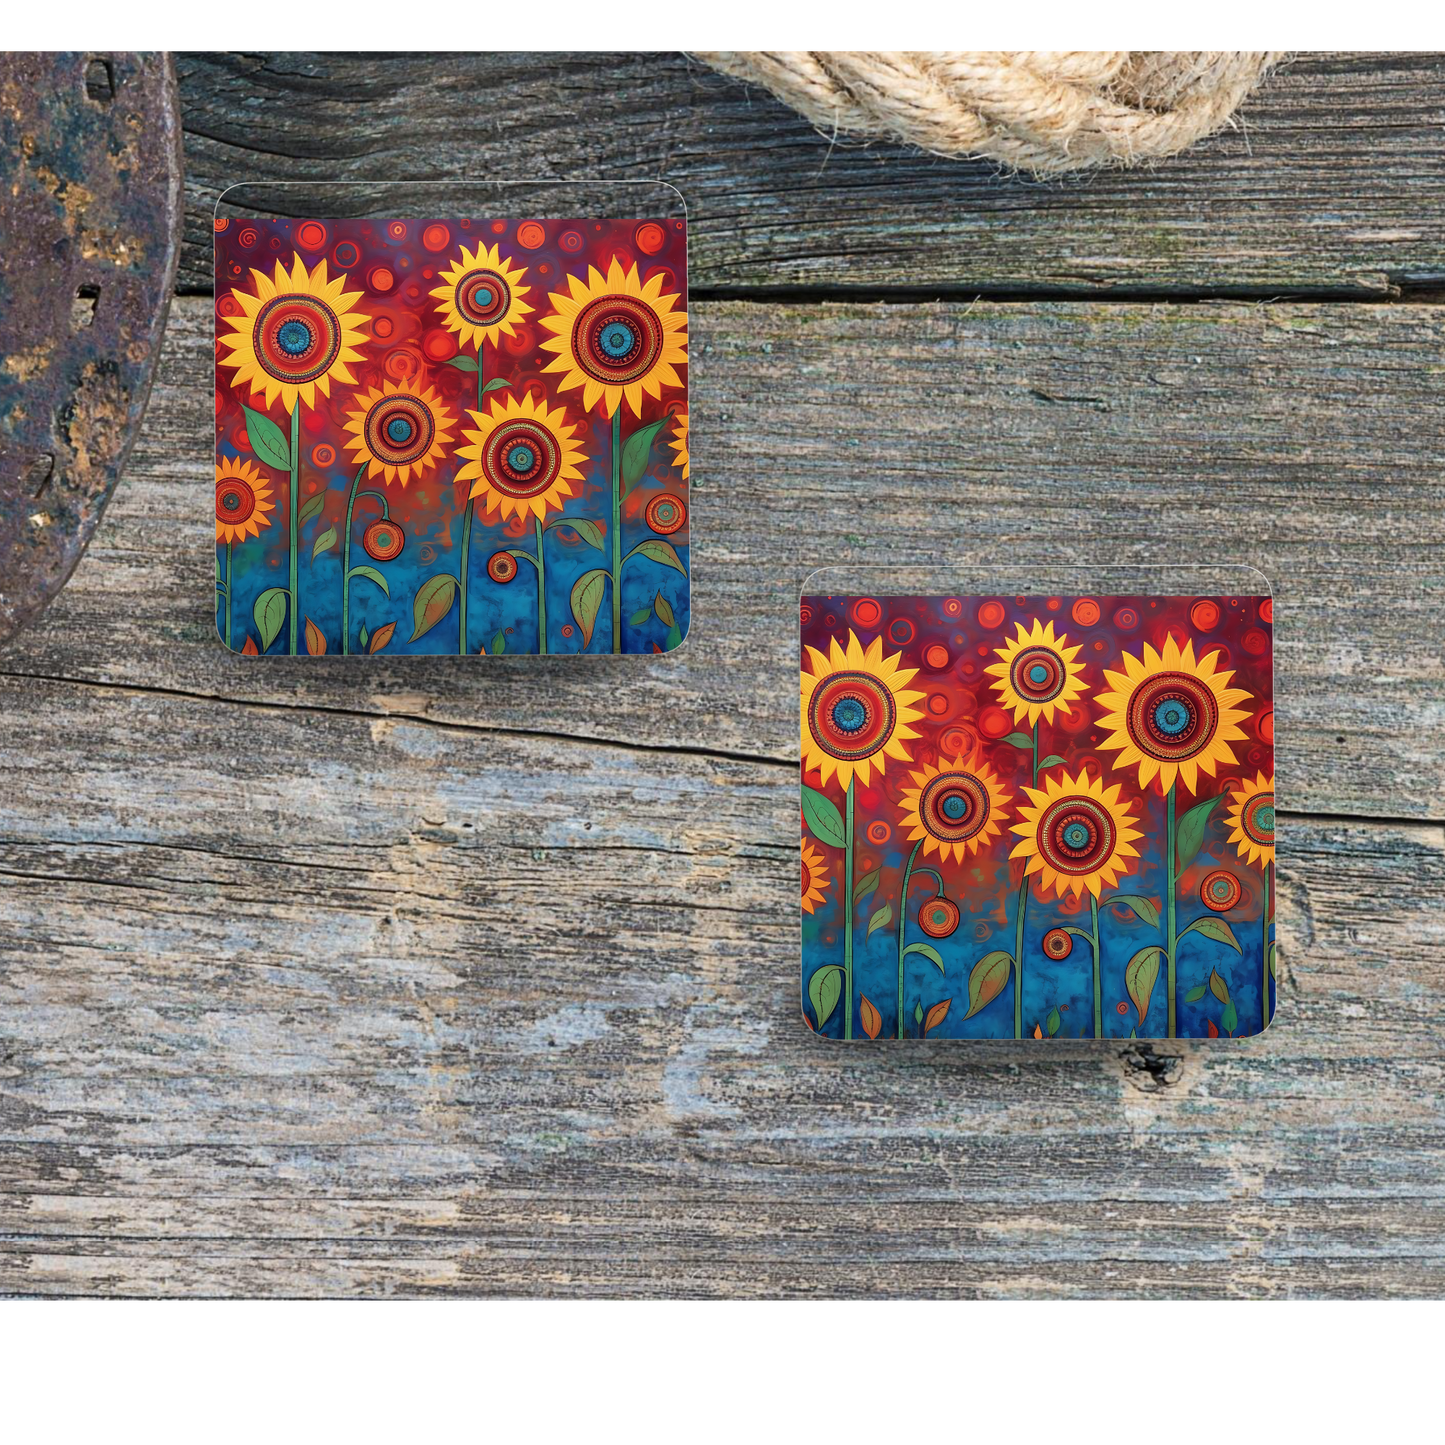 Beautifully Printed Folk Art Sunflowers Wooden Coasters for Stylish Home Décor